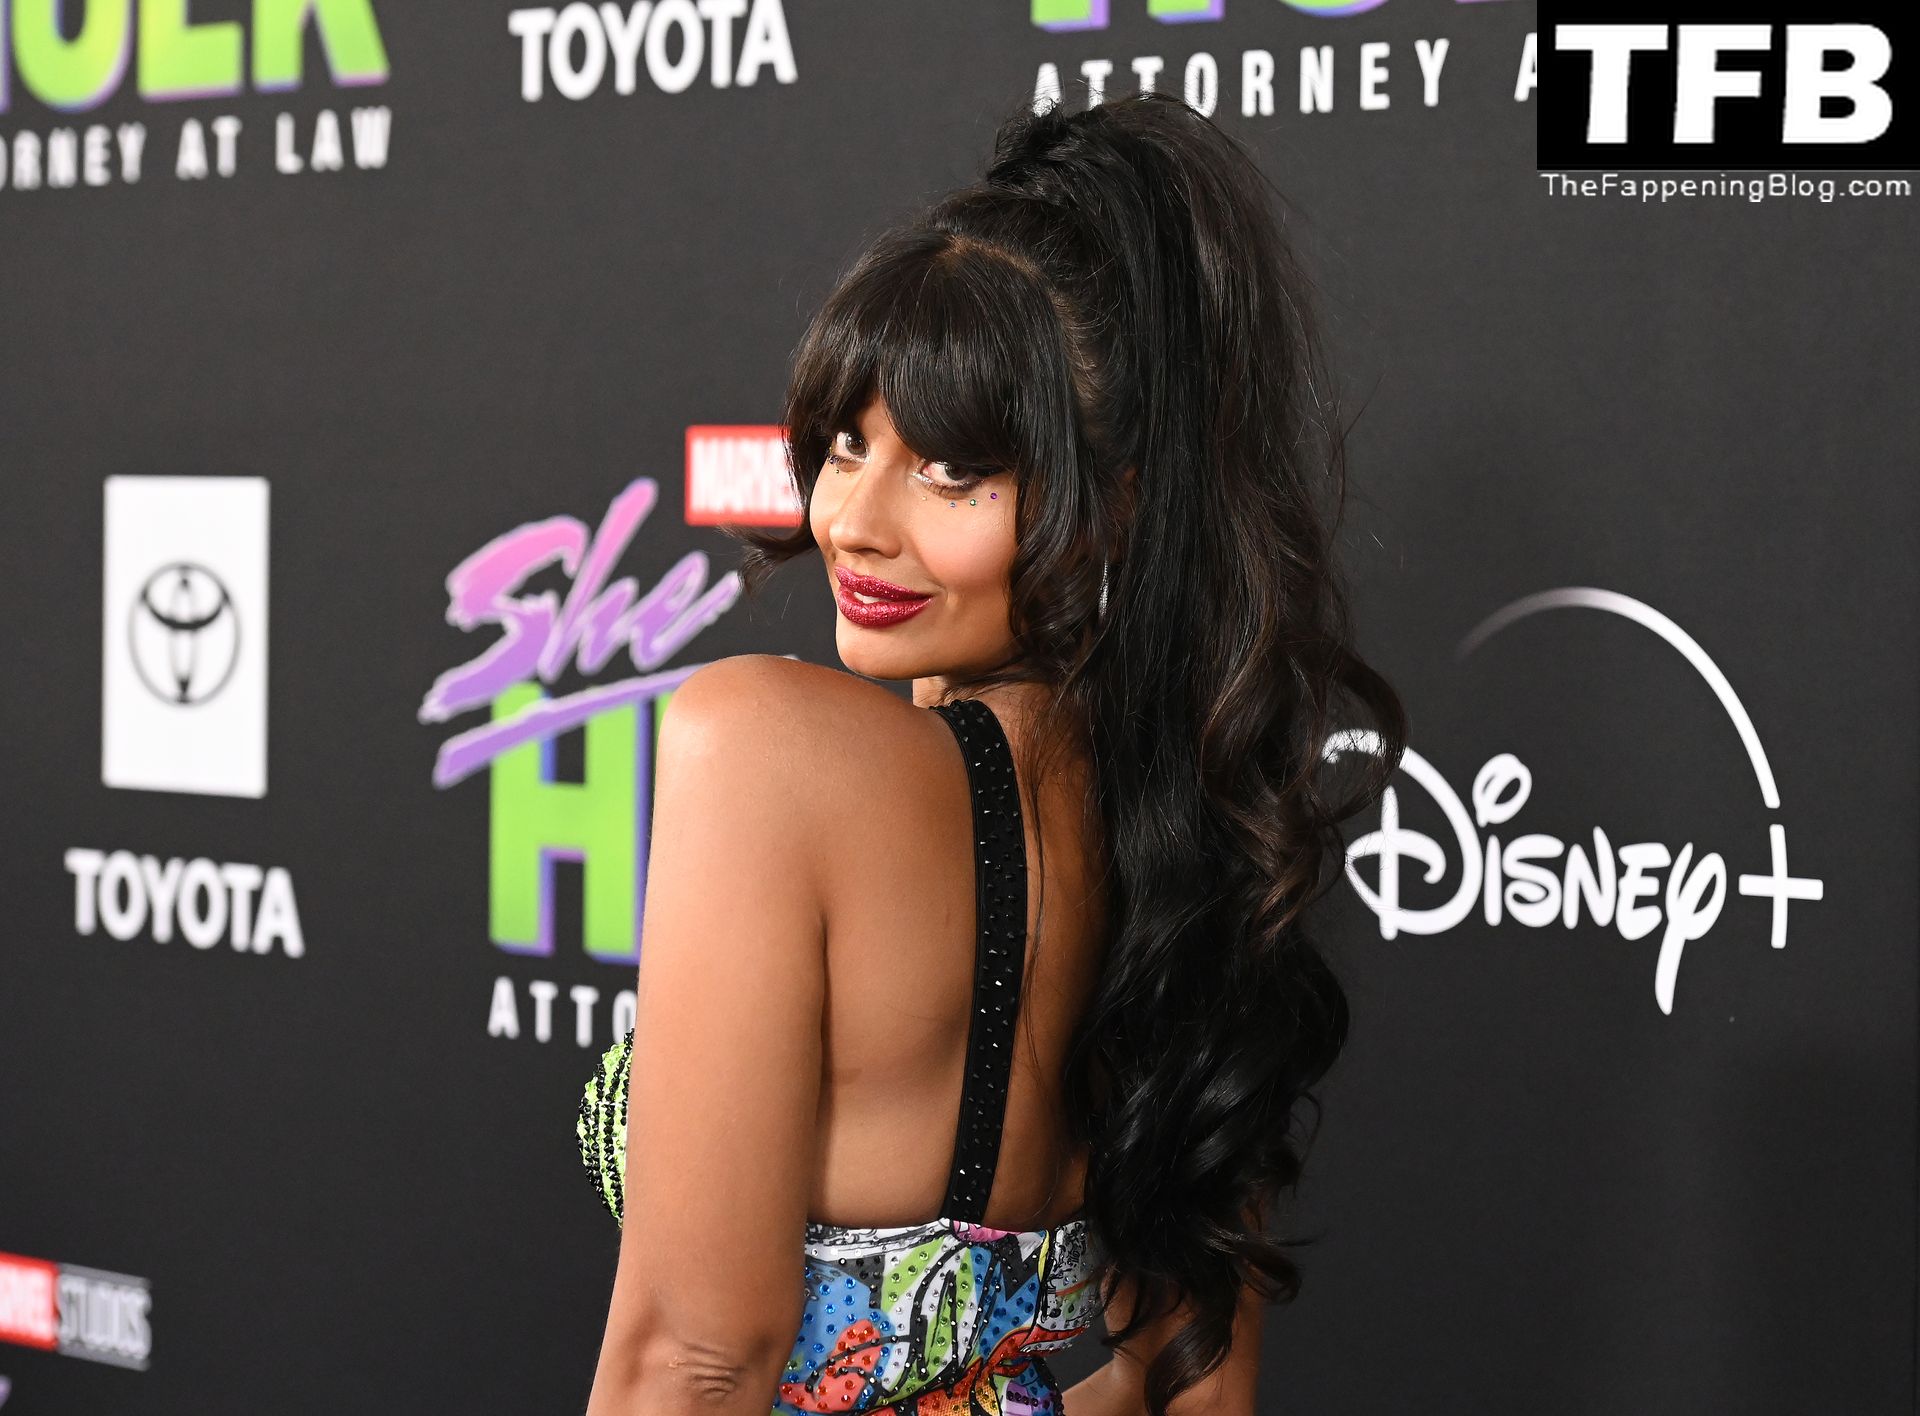 Jameela Jamil Sexy The Fappening Blog 30 - Jameela Jamil Flaunts Her Big Tits at the Premiere of Disney+’s “She Hulk: Attorney at Law” in LA (53 Photos)